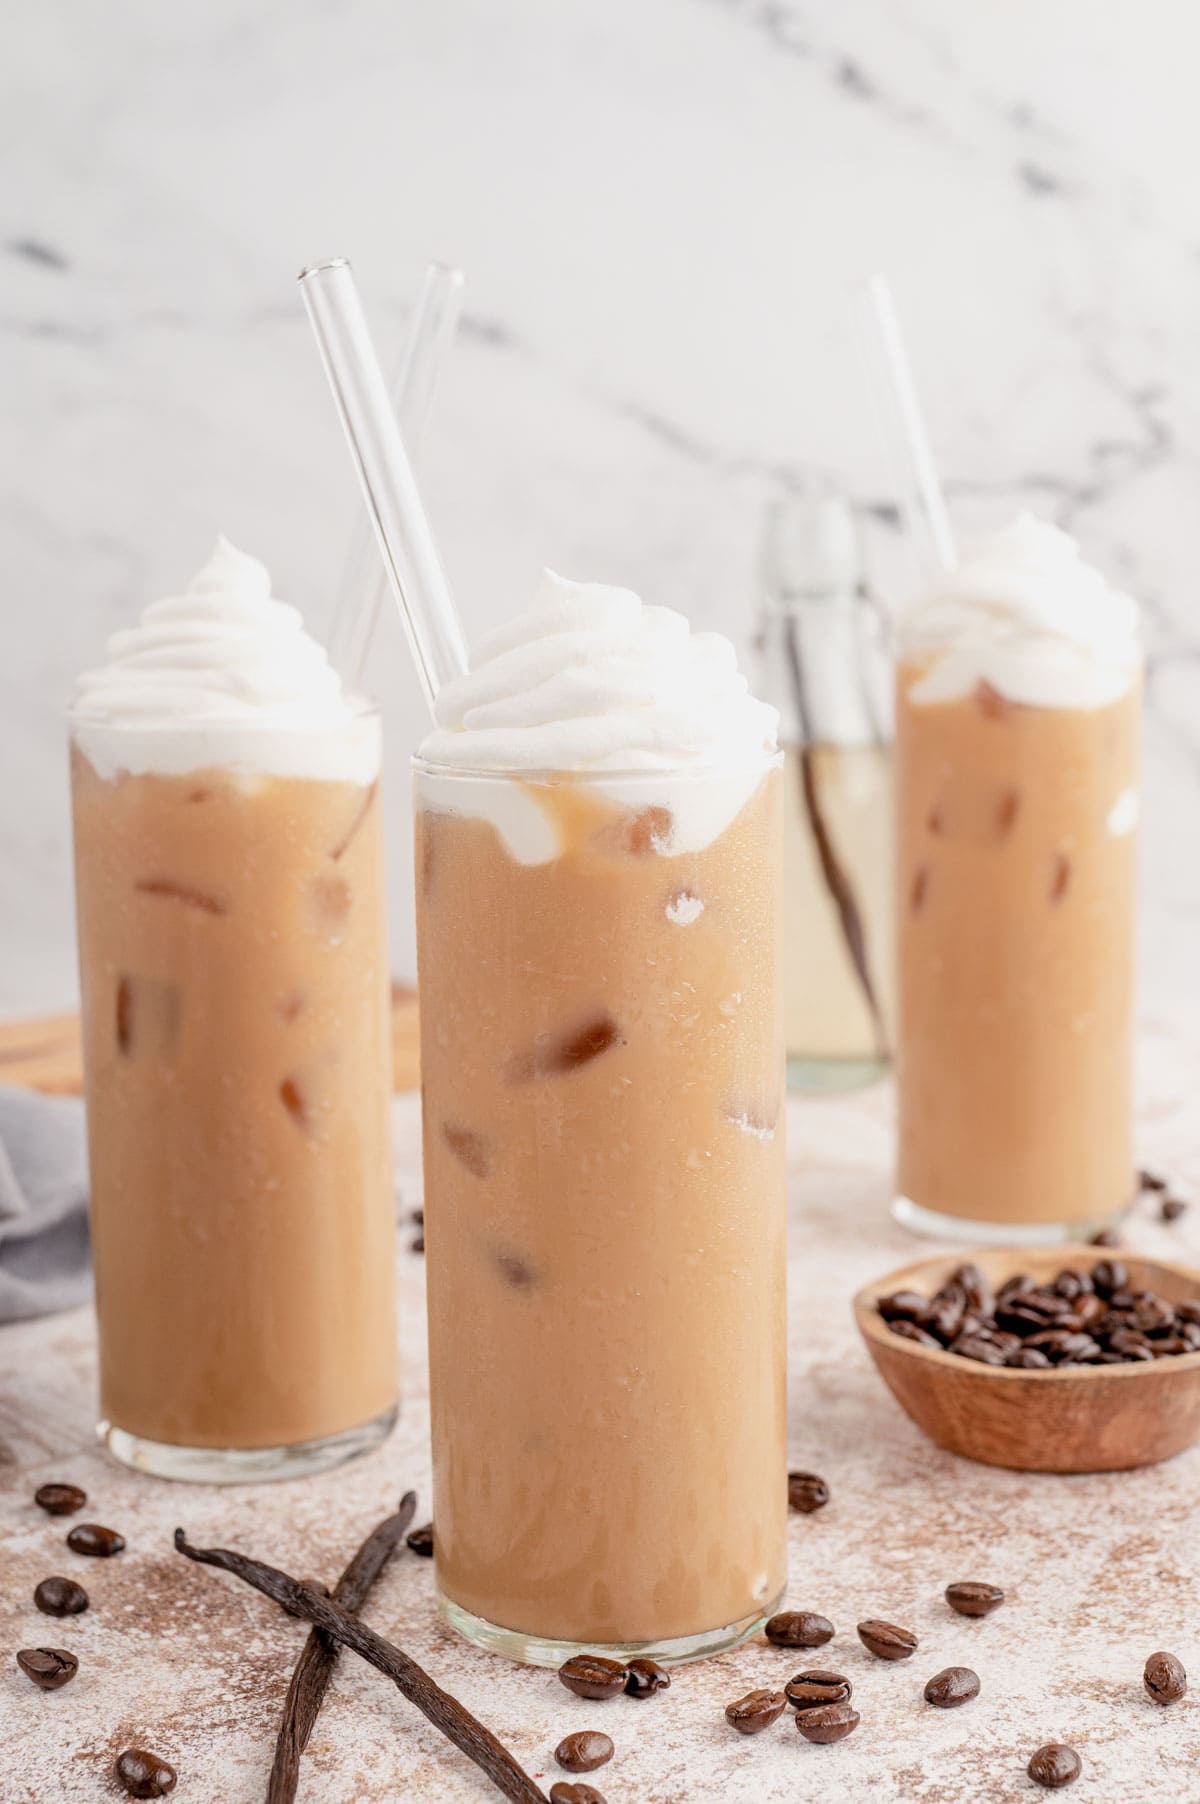 Three glasses of iced coffee with whipped cream and straws.